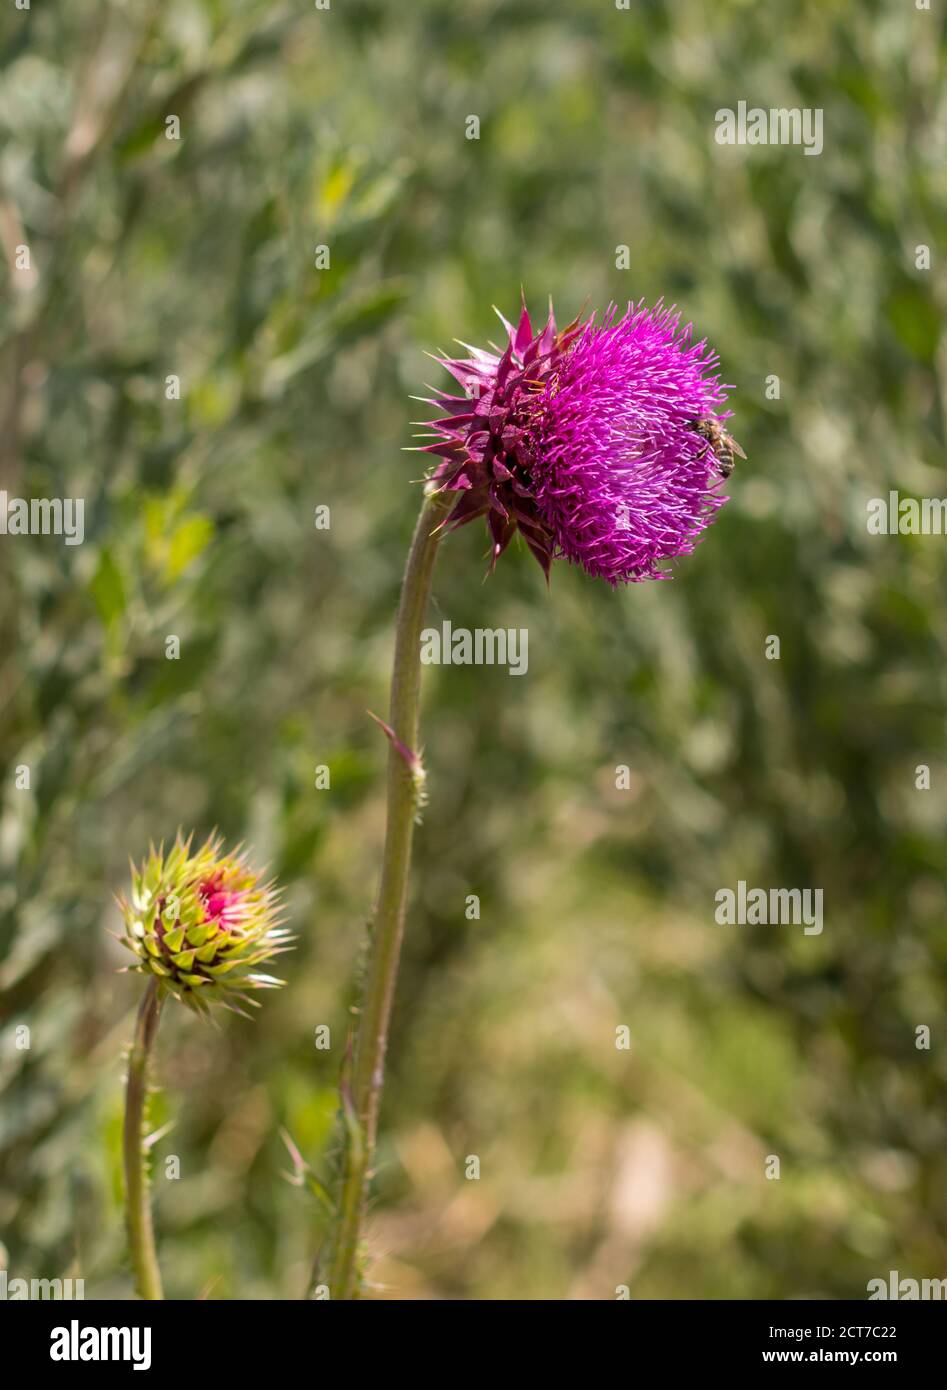 Thistle flower on an unfocused background Stock Photo